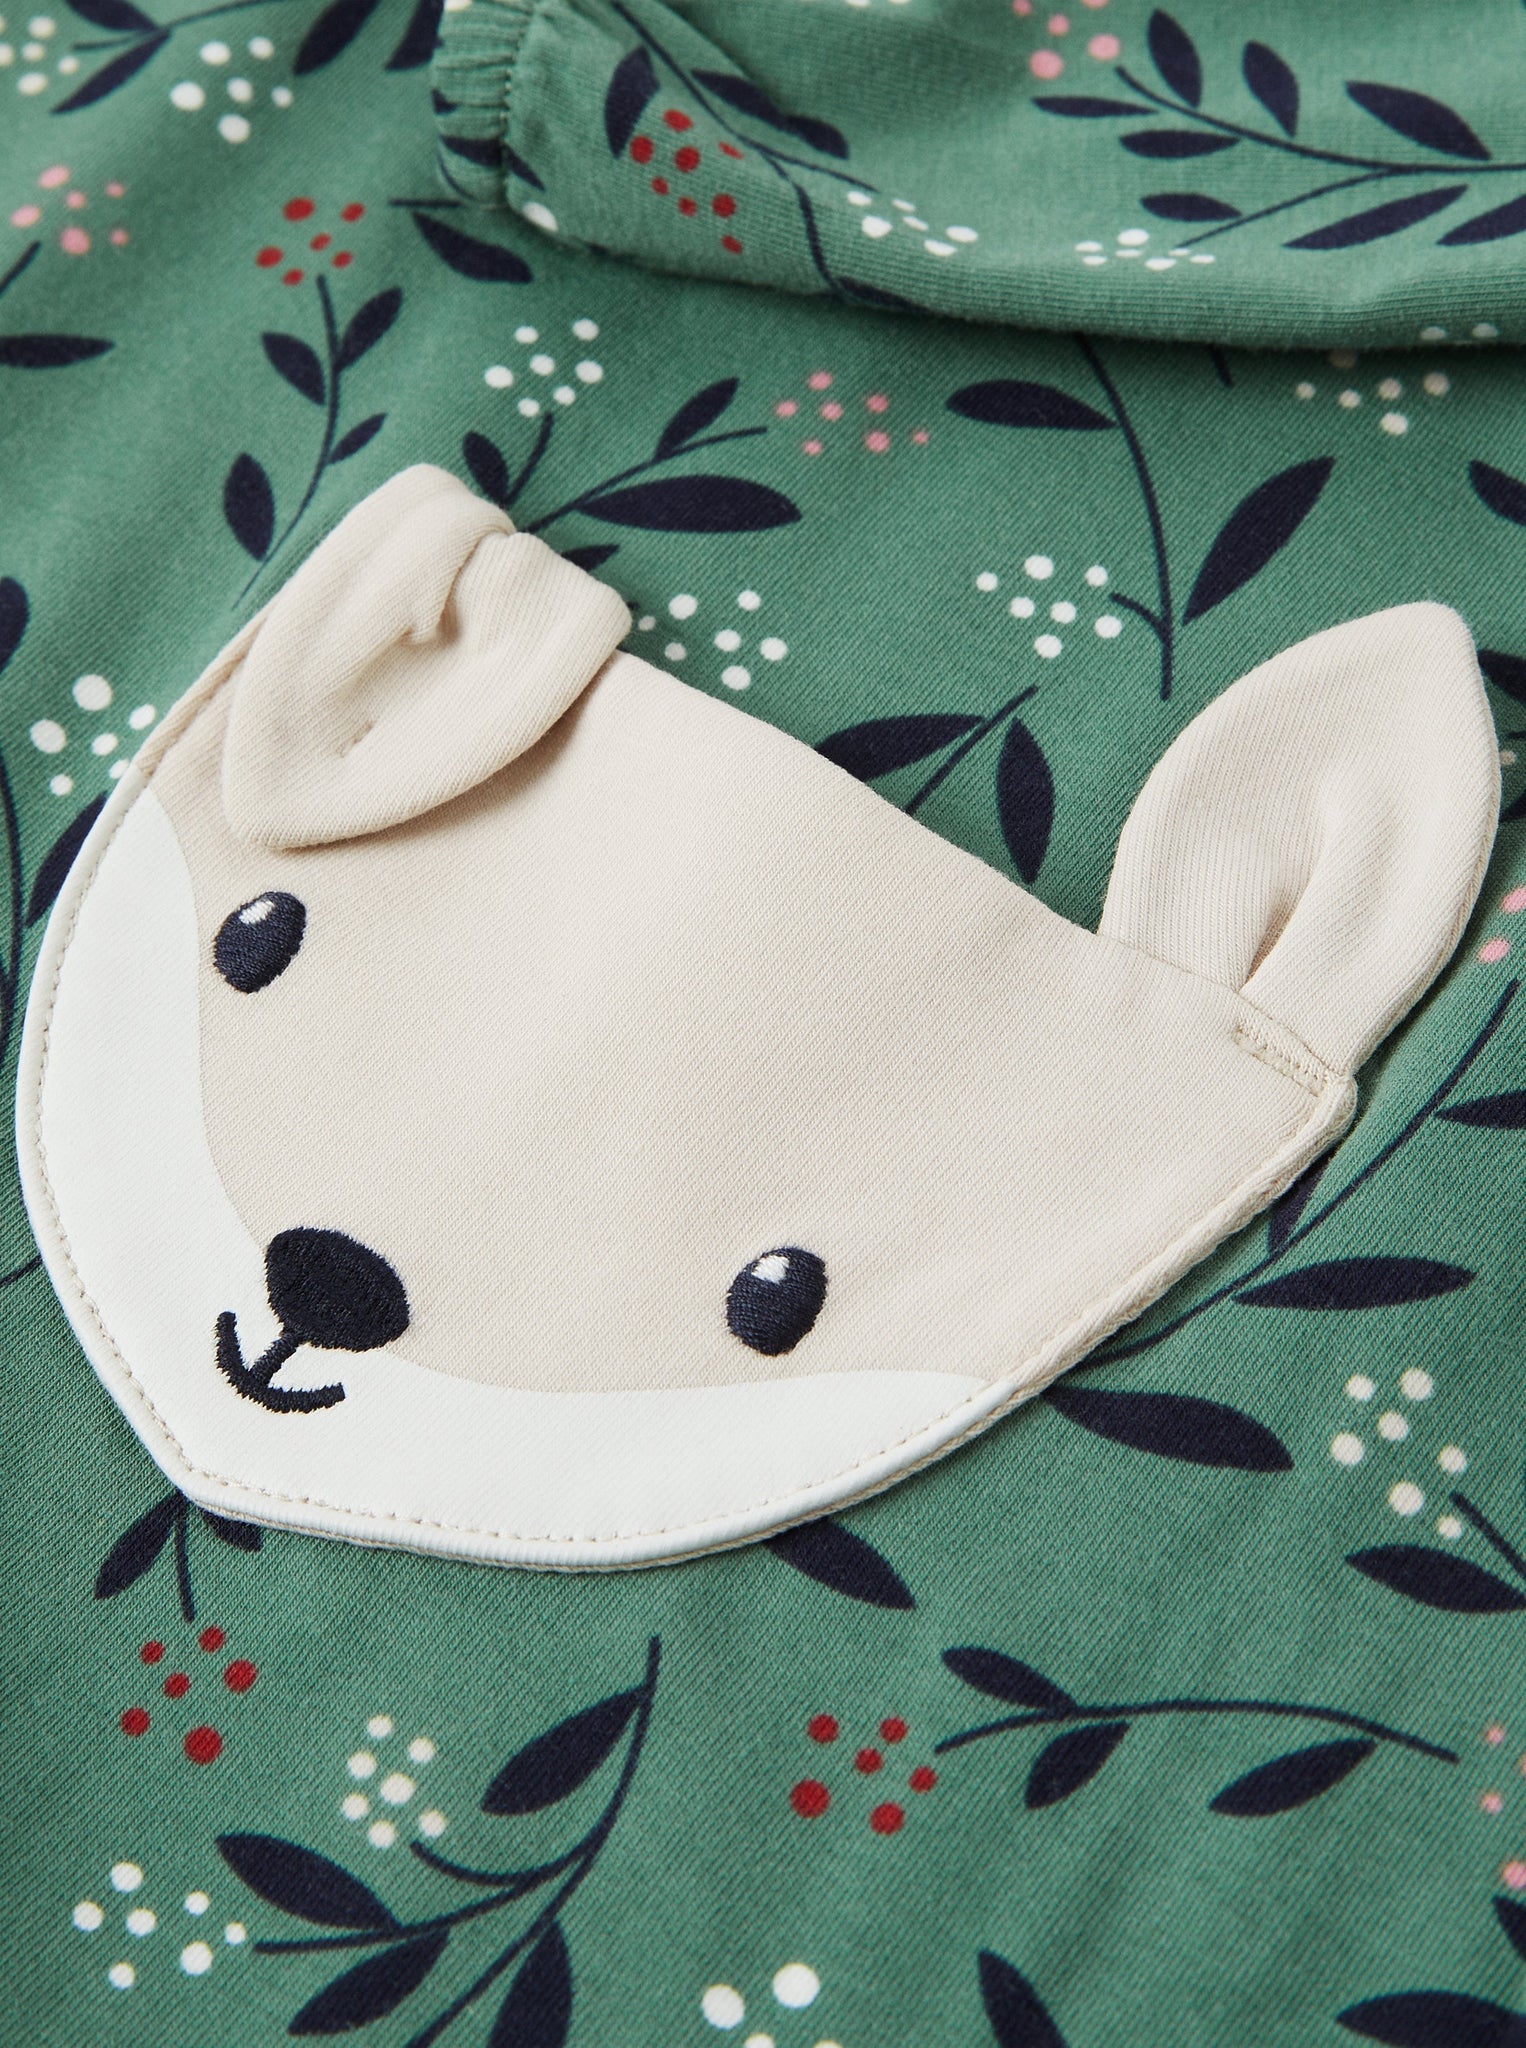 Organic Cotton Rabbit Kids Top from the Polarn O. Pyret kidswear collection. Clothes made using sustainably sourced materials.